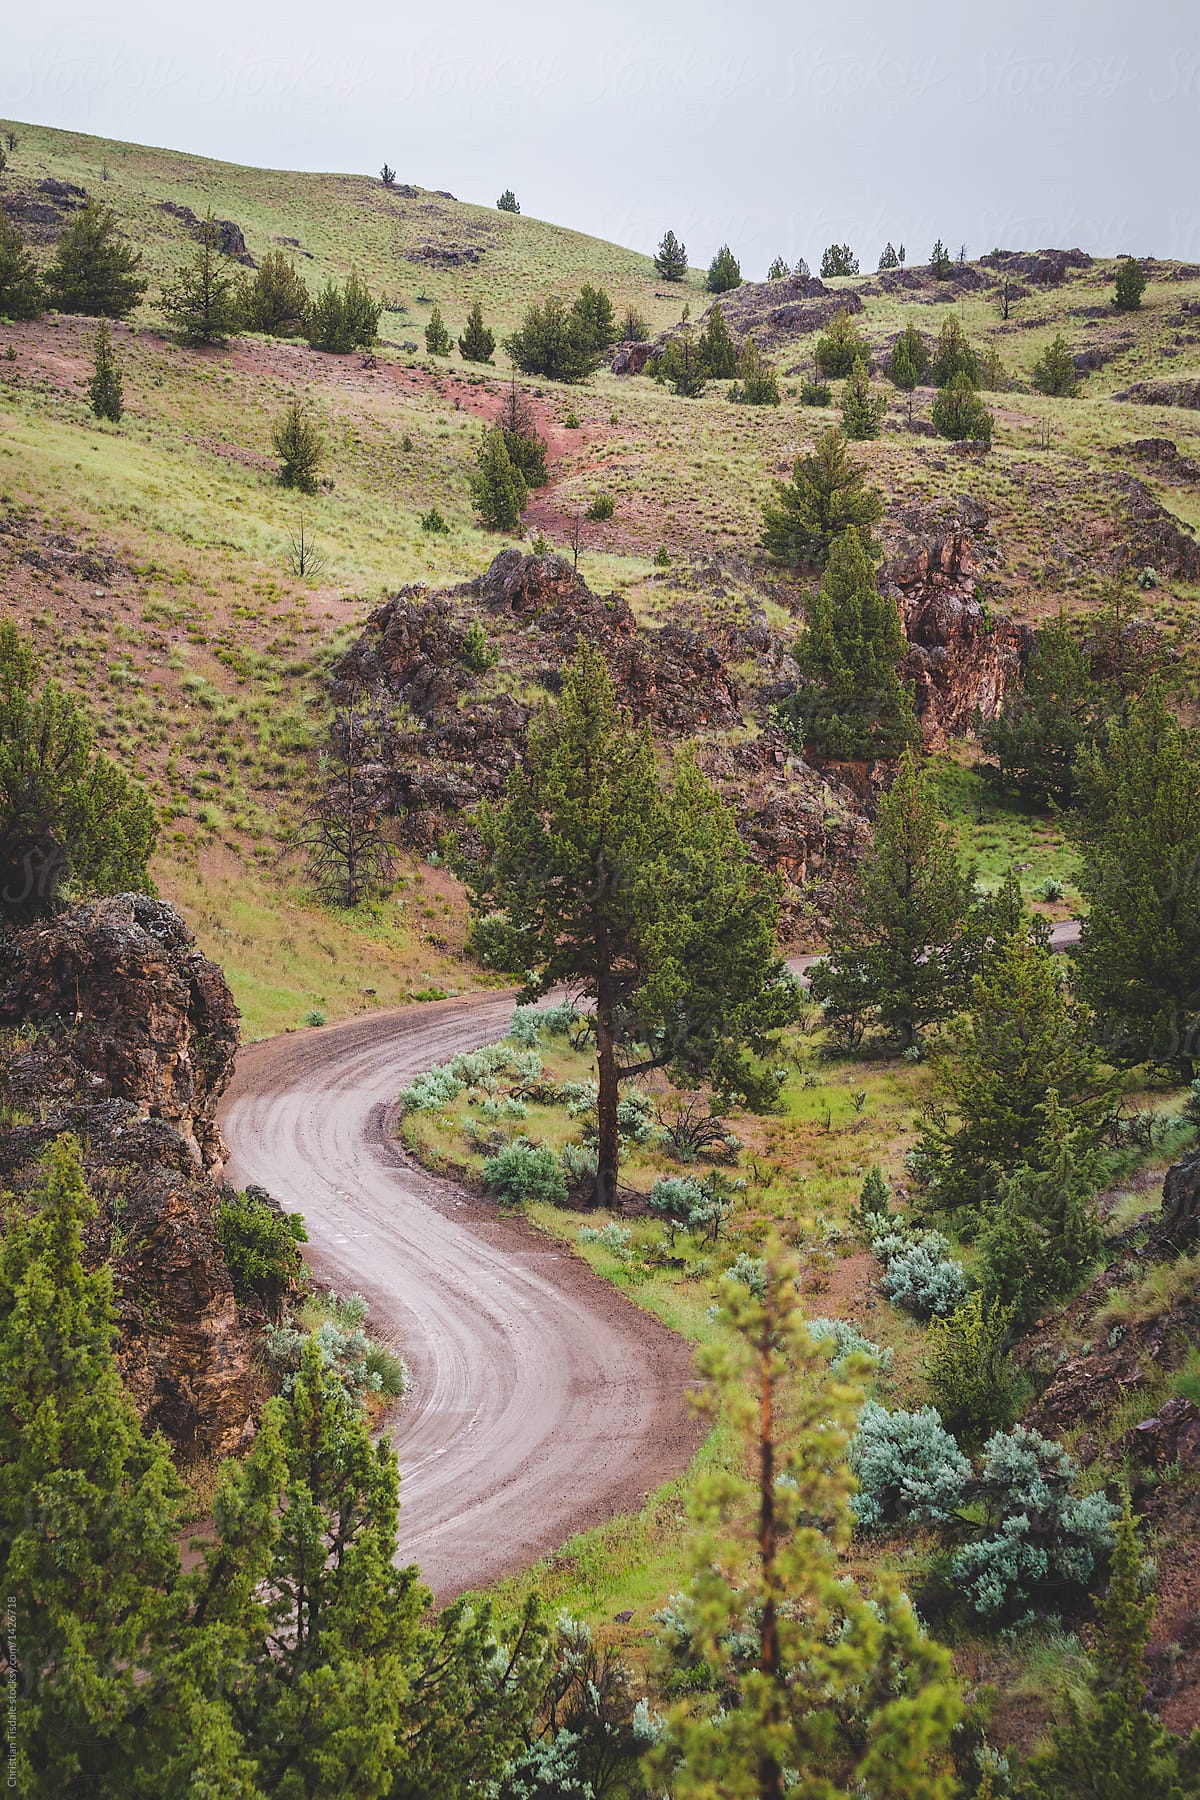 A winding dirt road in the country